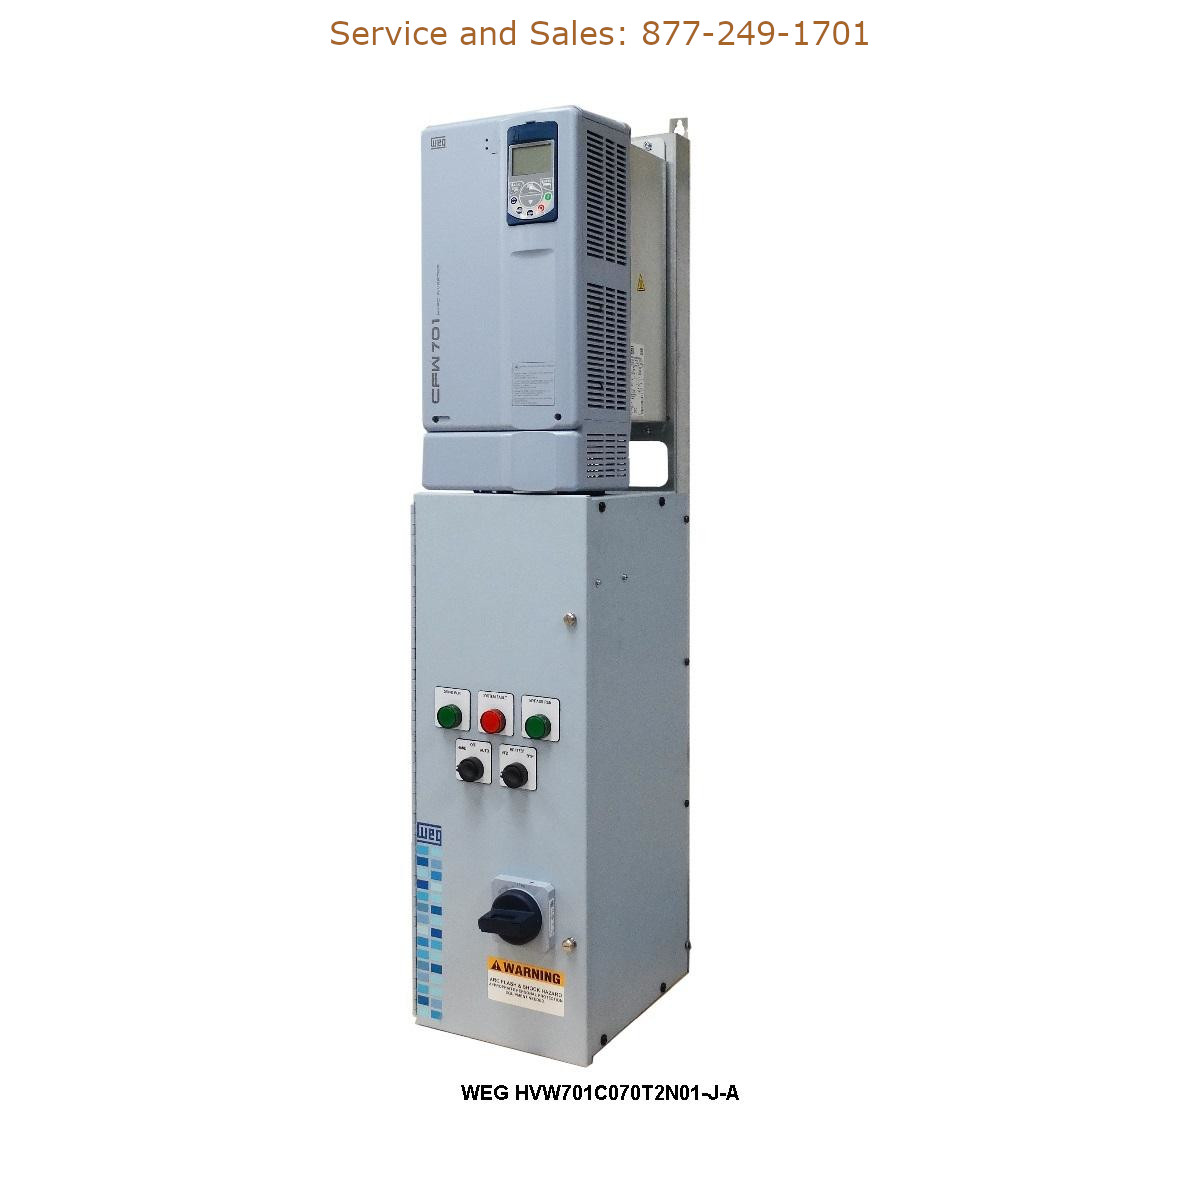 WEG HVW701C070T2N01-J-A WEG Model Number HVW701C070T2N01-J-A WEG Drives, Variable Speed Drives Repair Service, Troubleshooting, Replacement Parts https://gesrepair.com/wp-content/uploads/2022/WEG/WEG_HVW701C070T2N01-J-A_Drives_Variable_Speed_Drives.jpg